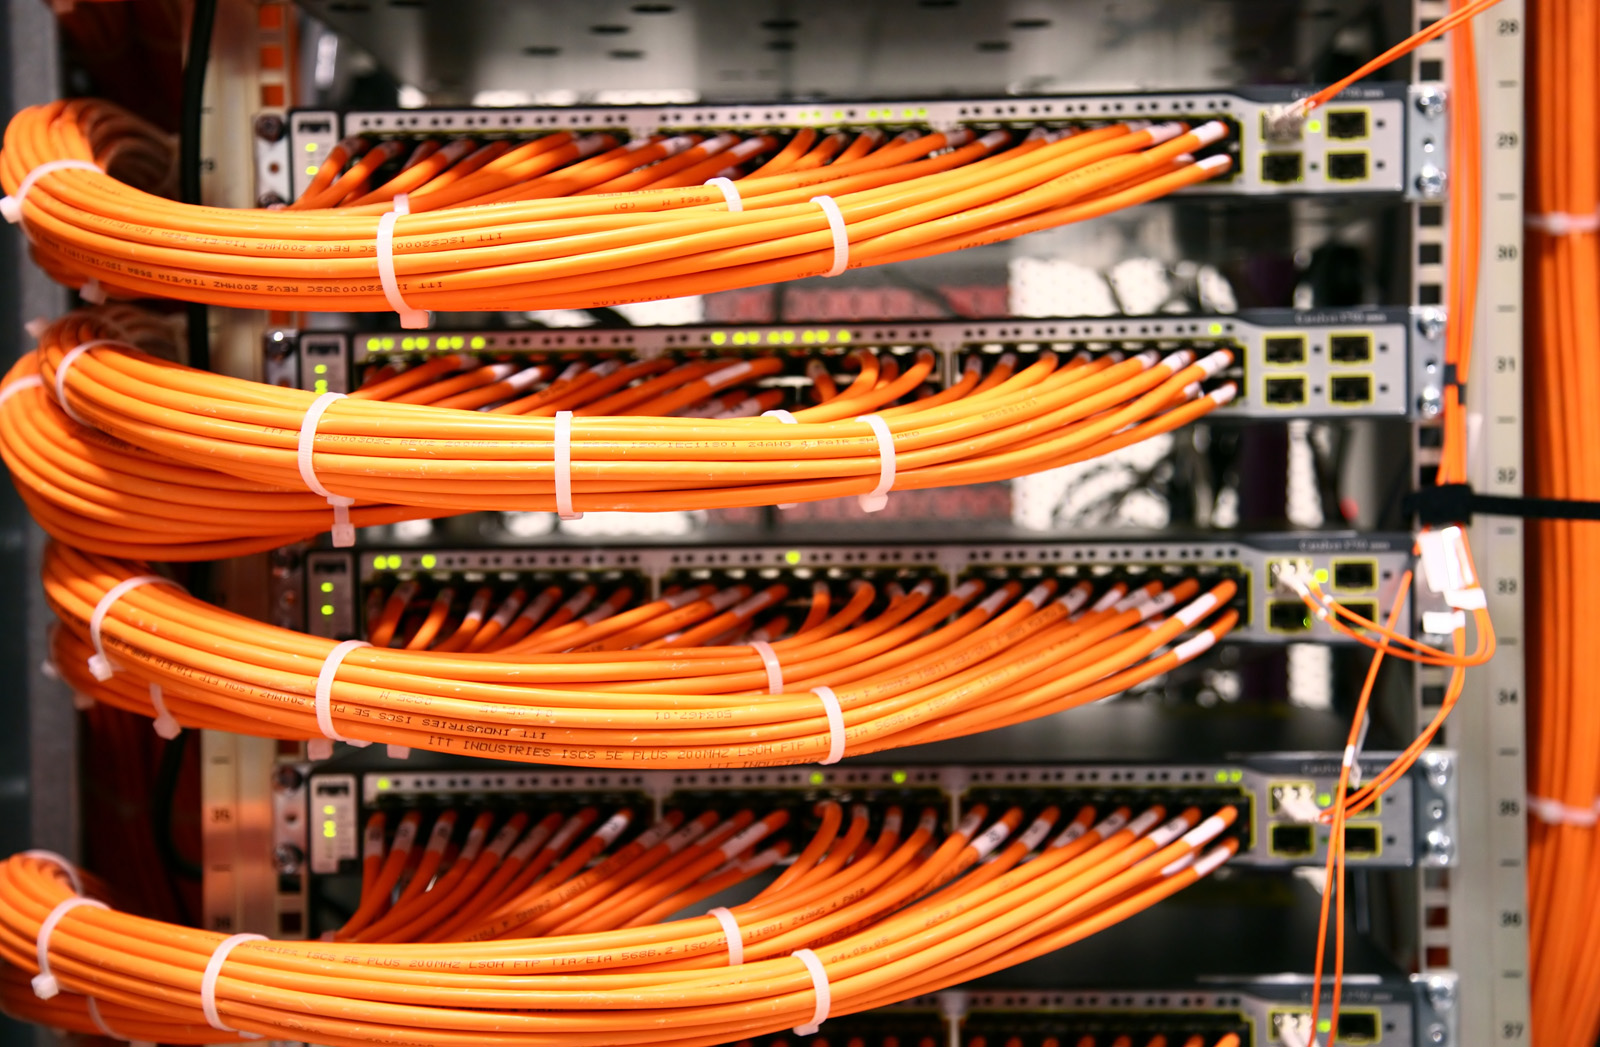 Ormond Beach Florida High Quality Voice & Data Network Cabling Solutions